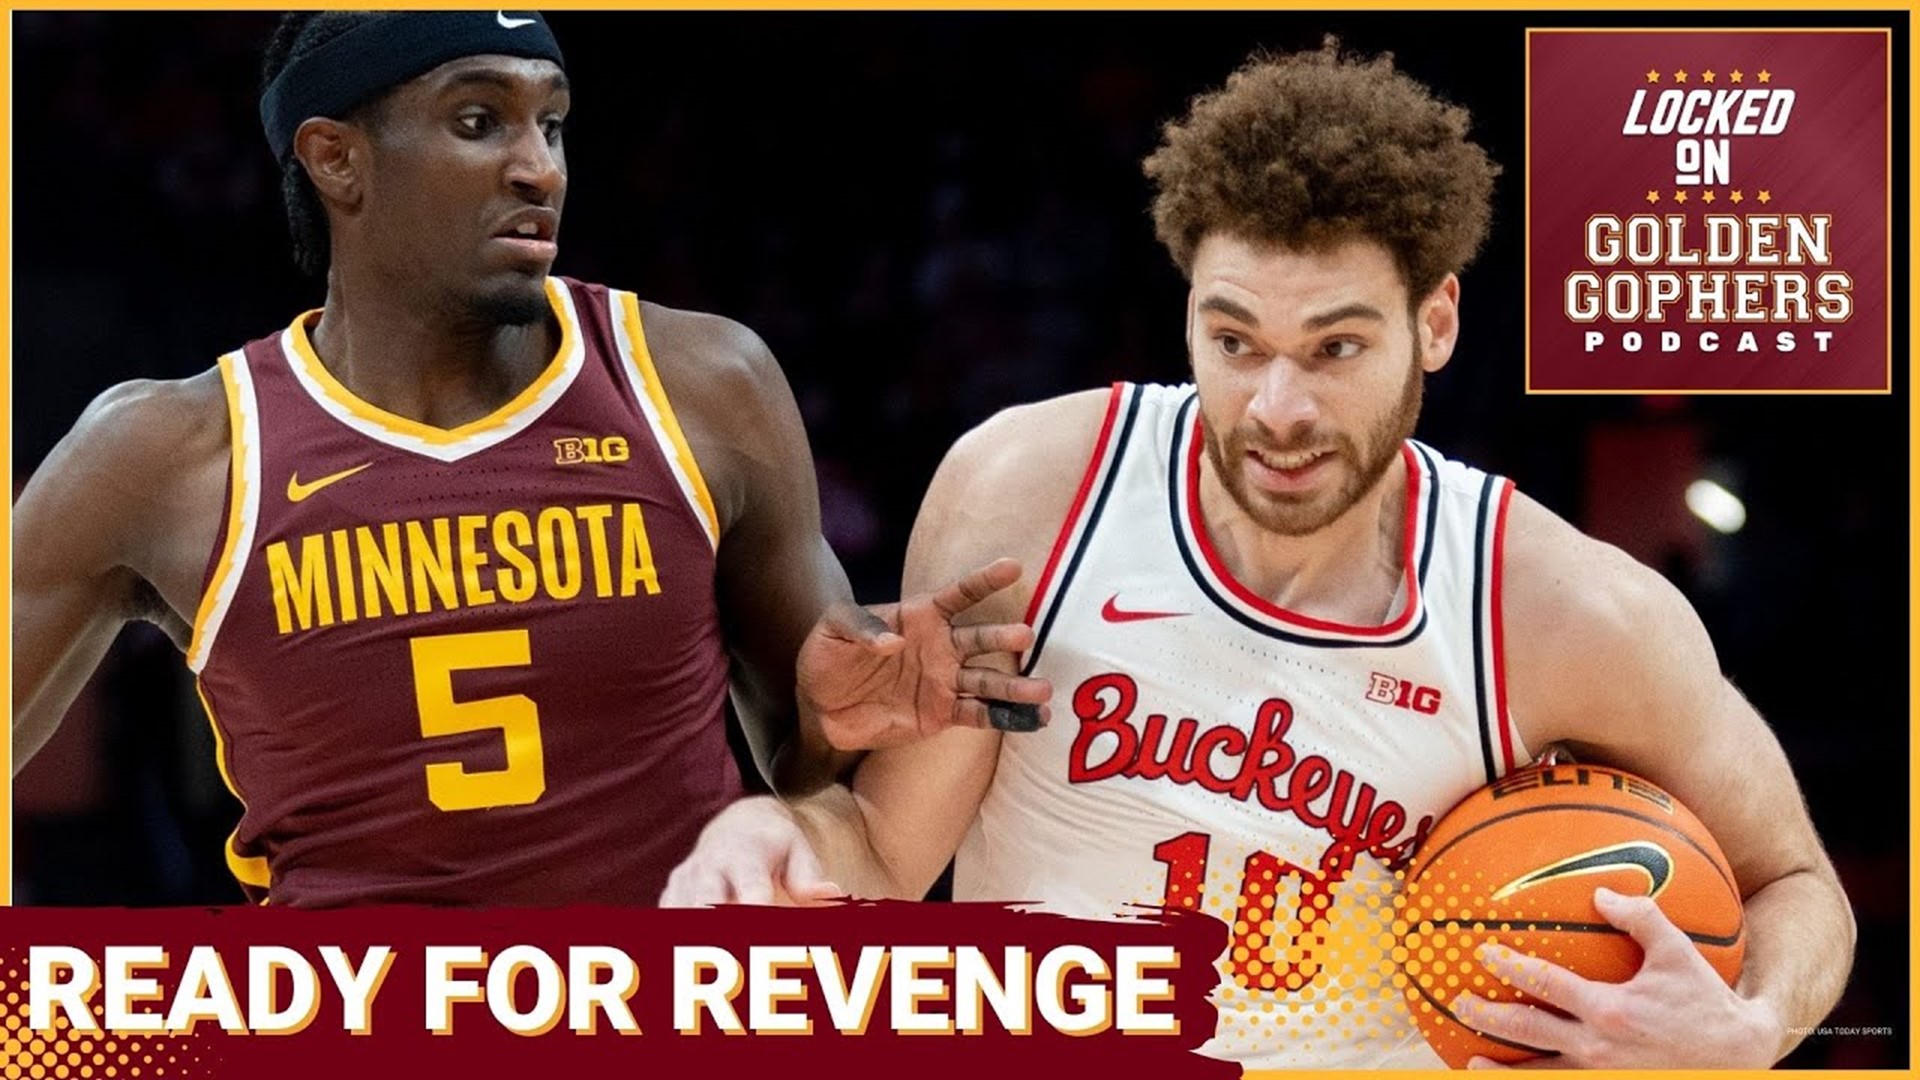 On today's episode of the Locked On Golden Gophers podcast, we talk about the Minnesota Gophers who are ready for revenge vs Ohio State